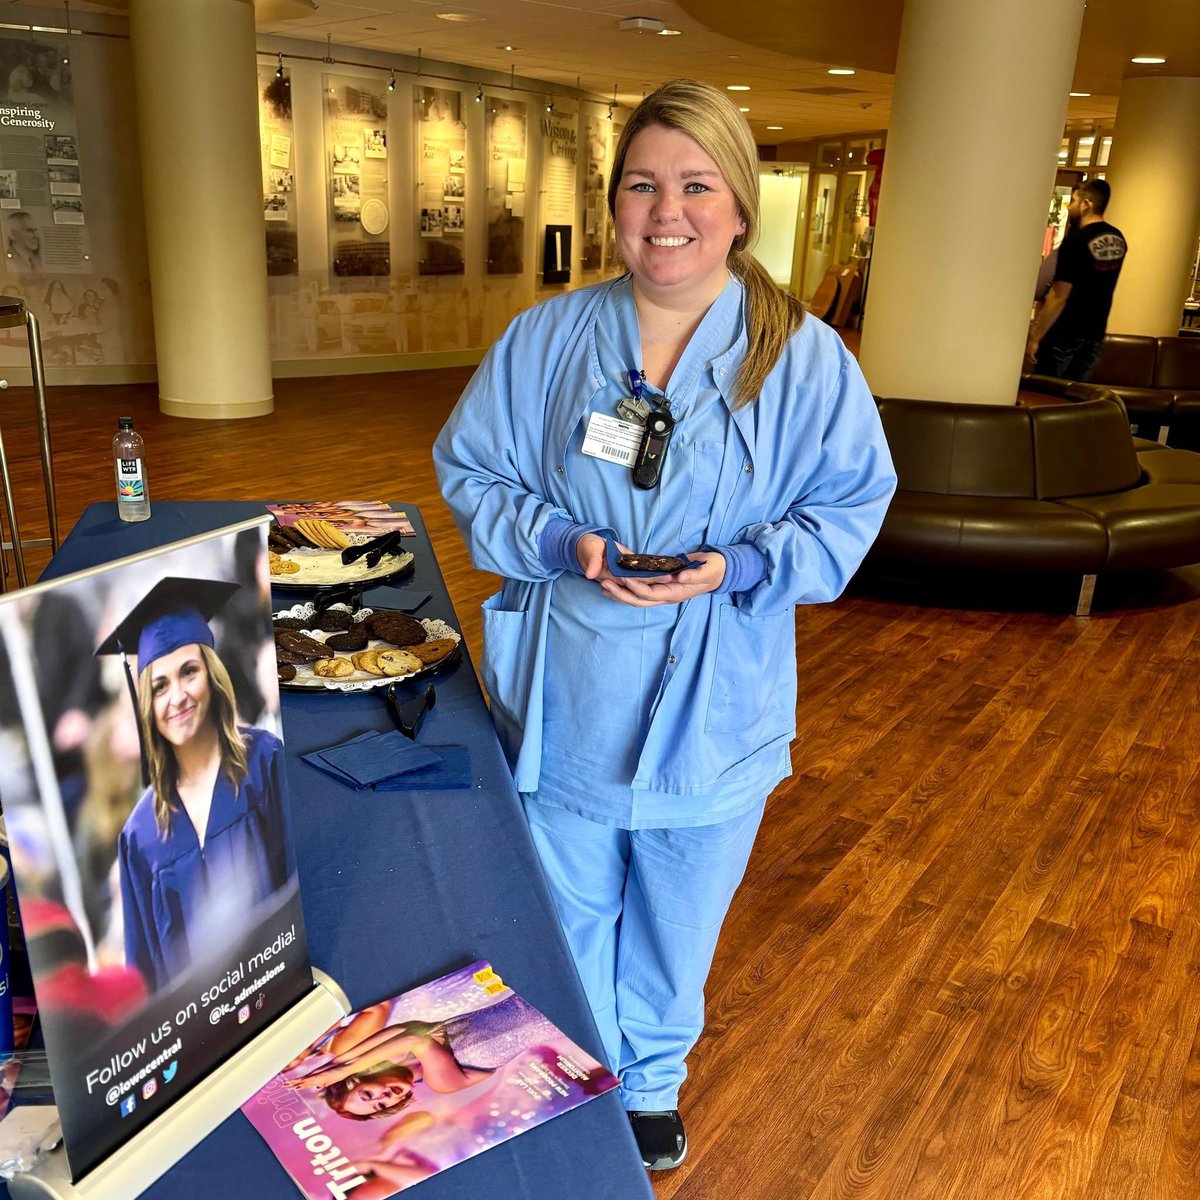 Along with celebrating our nursing graduates last week, we also recognized #TritonAlumni with an Alumni Appreciation event at UnityPoint Health for Nurses Week! #TritonNation #AlwaysATriton #TritonExperience Learn more about our Nursing programs at iowacentral.edu/programs.asp